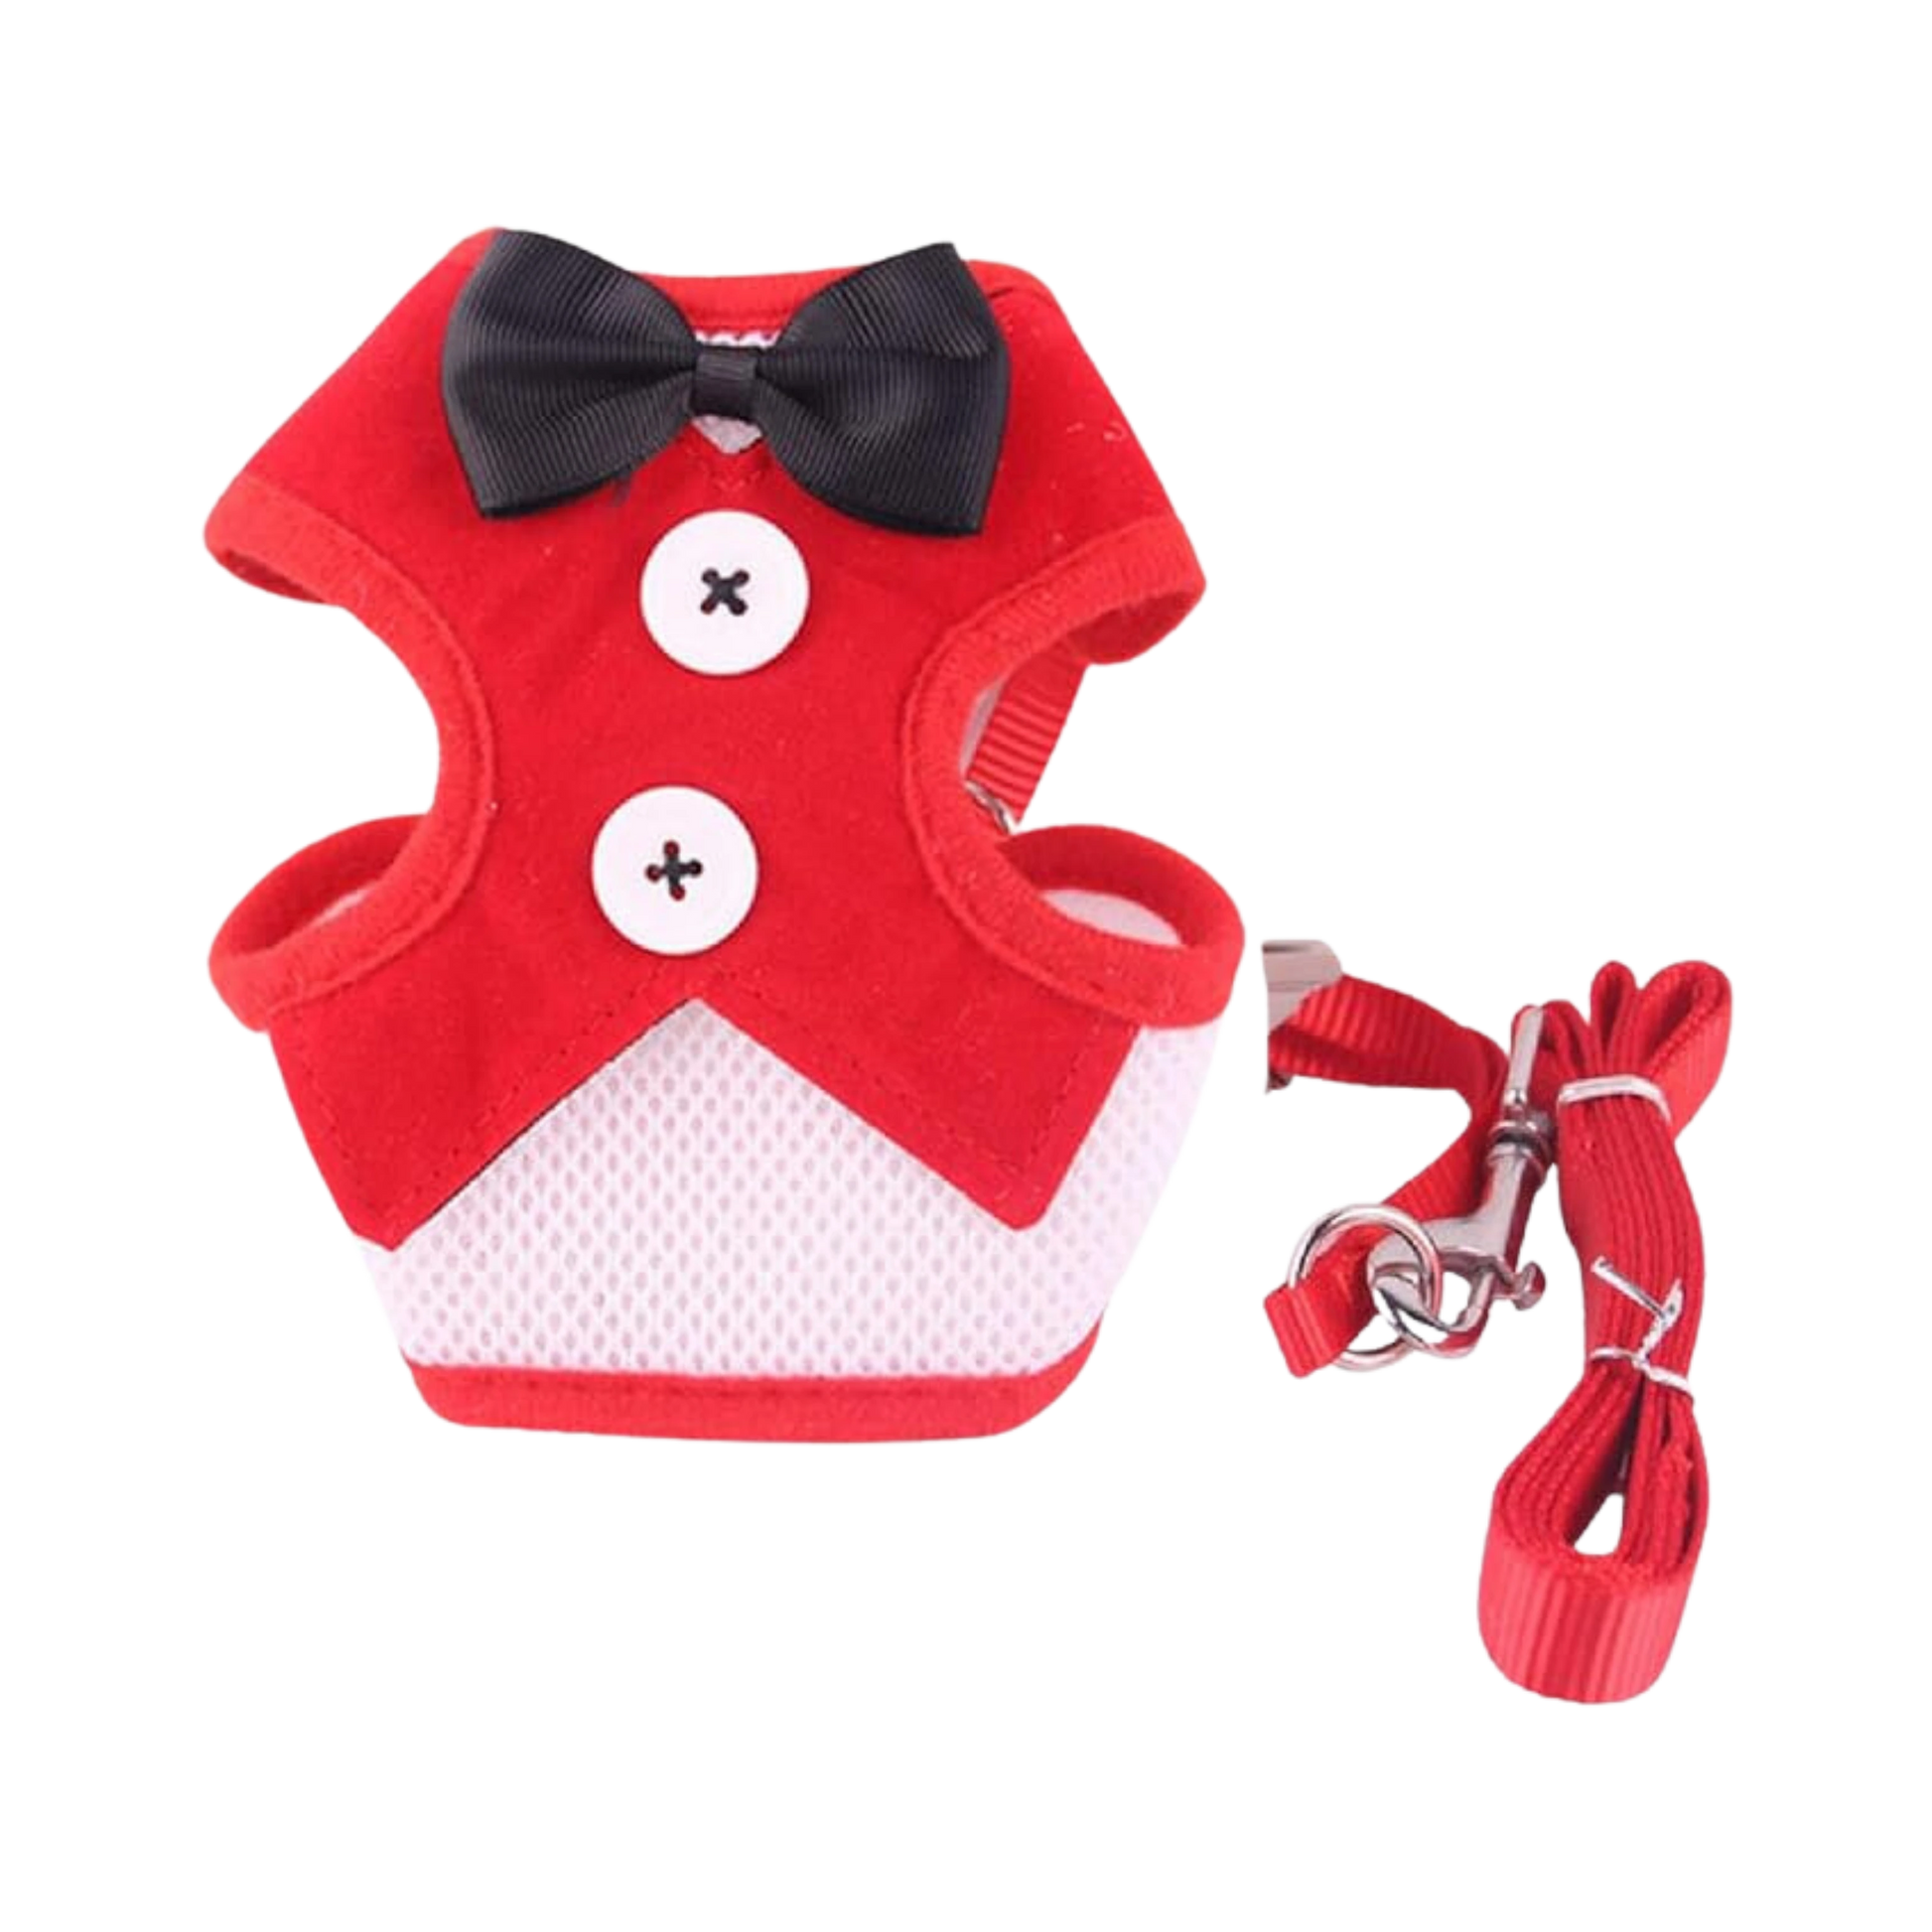 WW TOYBREED TUXIDO HARNESS WITH LEASH RED (M) MEDIUM